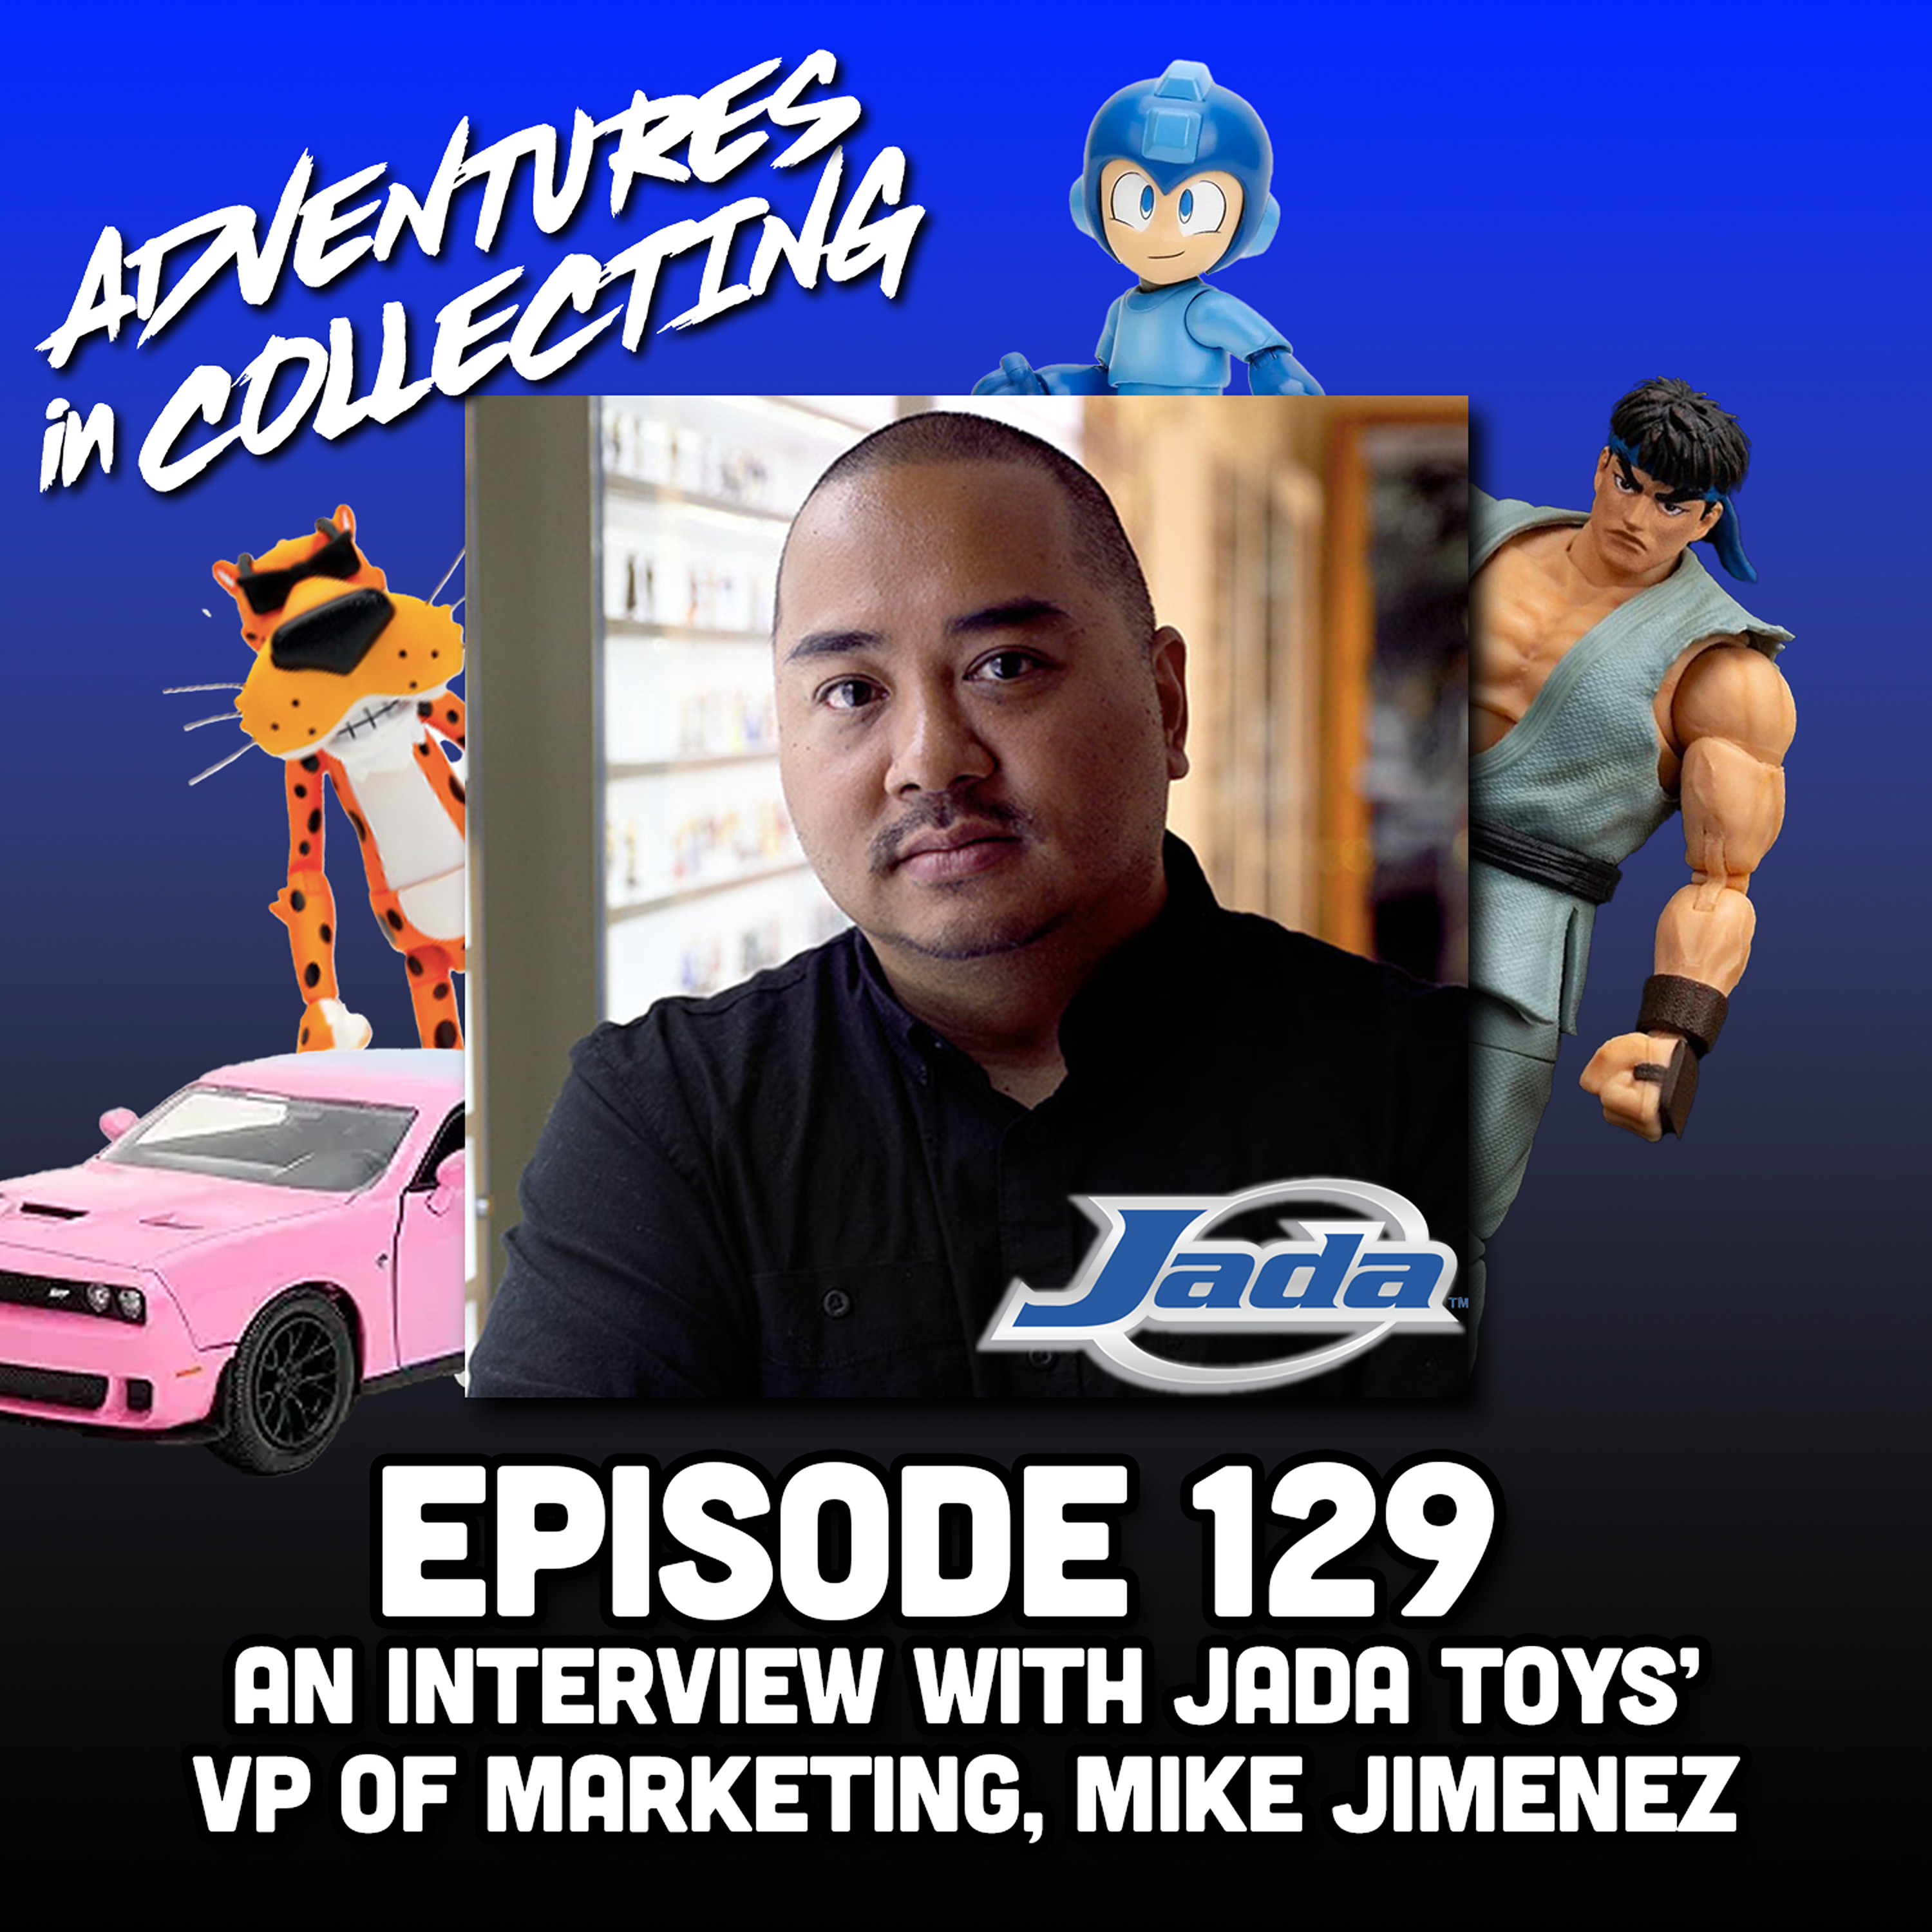 An Interview with Jada Toys’ VP of Marketing, Mike Jimenez